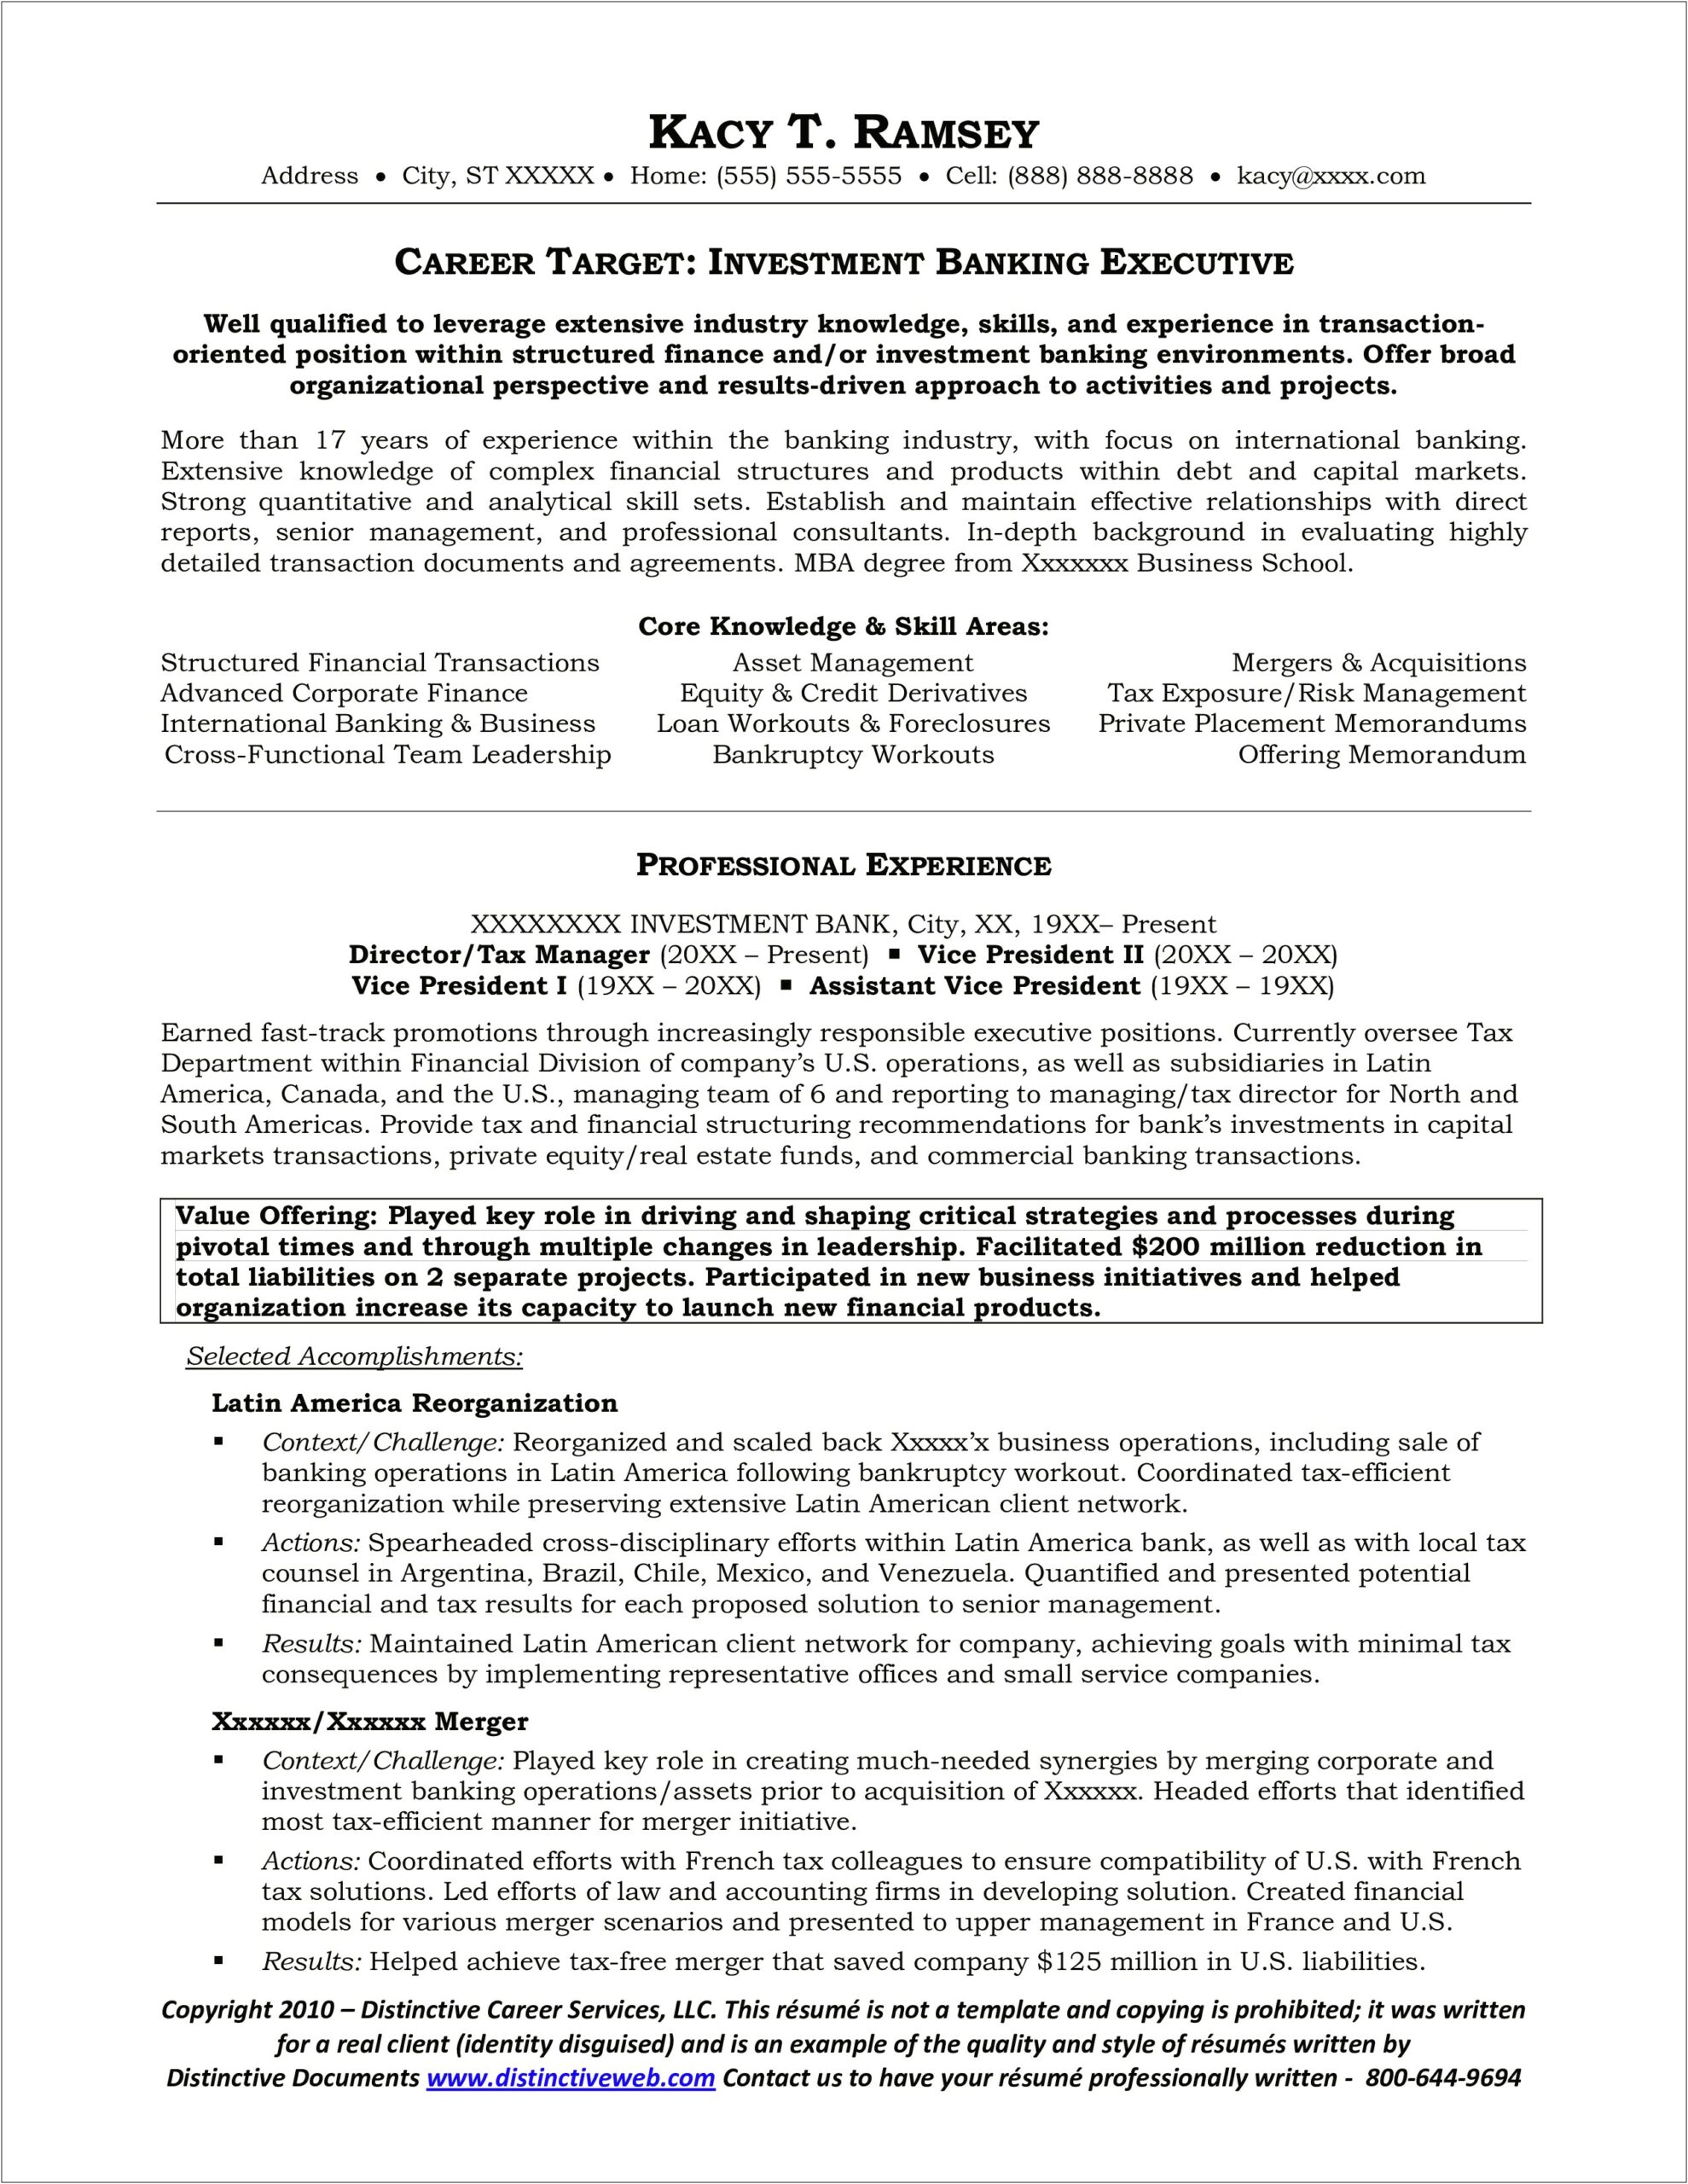 Investment Banking Career Objective Resume